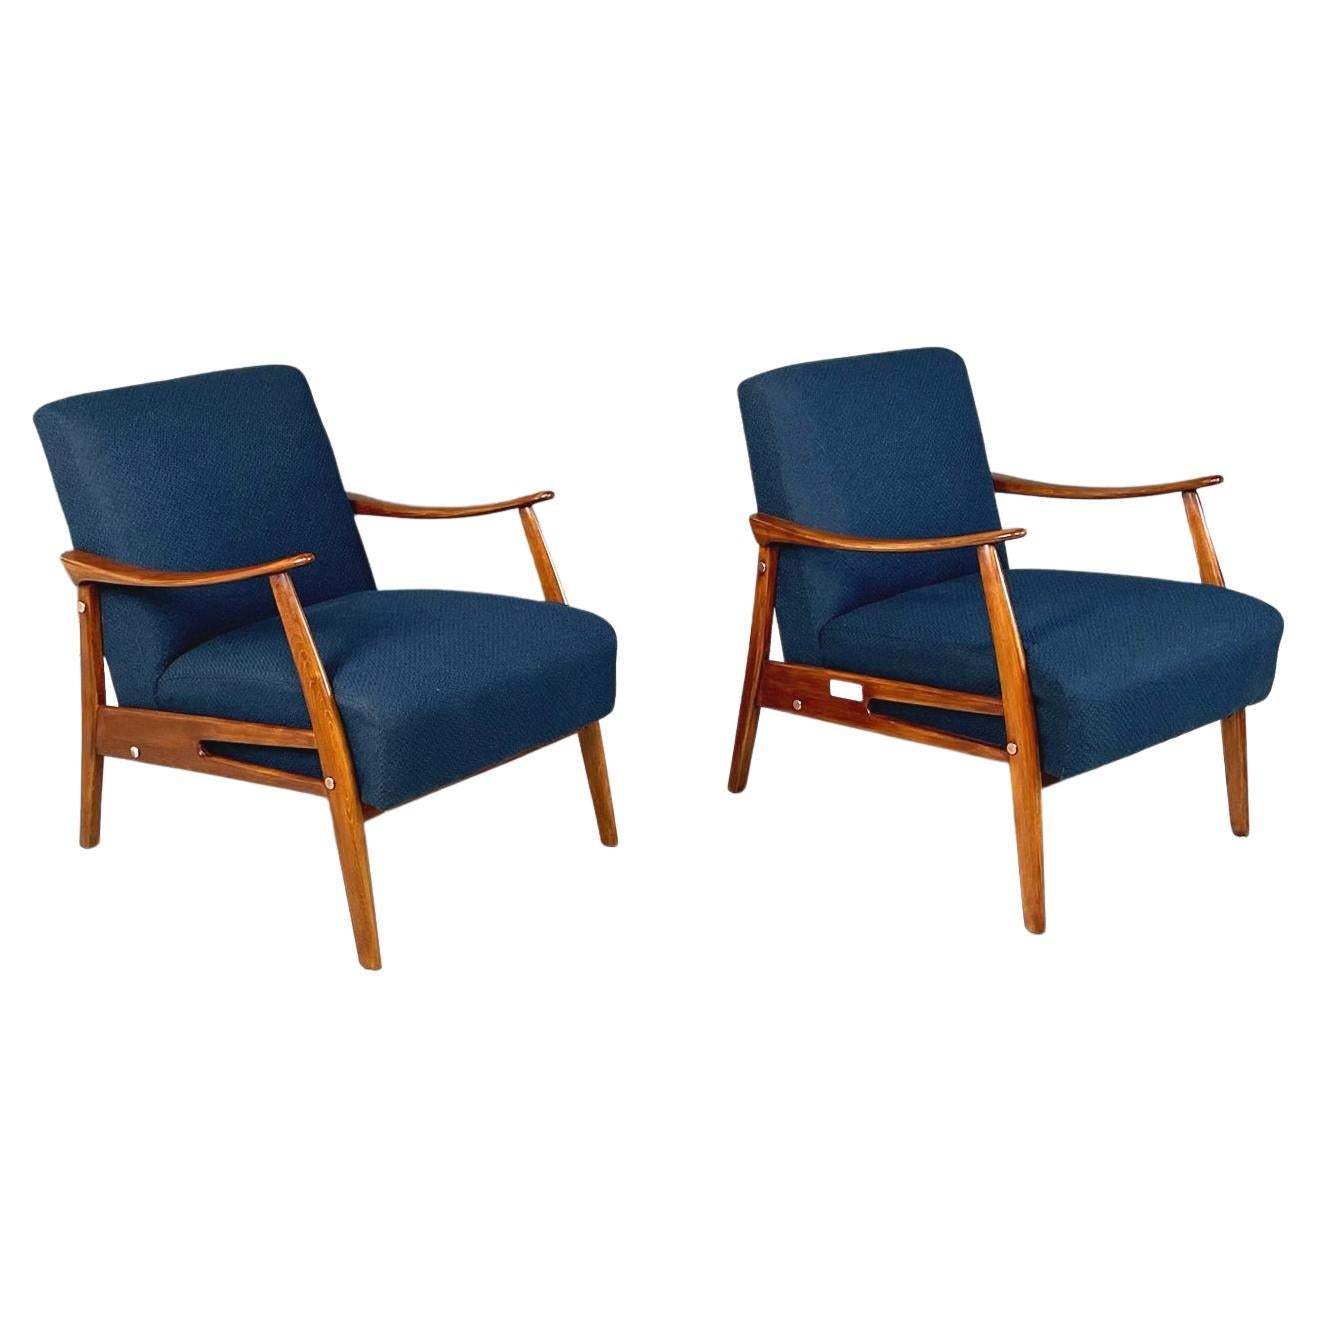 North Europa Mid-Century Armchairs in Blue Fabric and Beech Solid Wood, 1960s